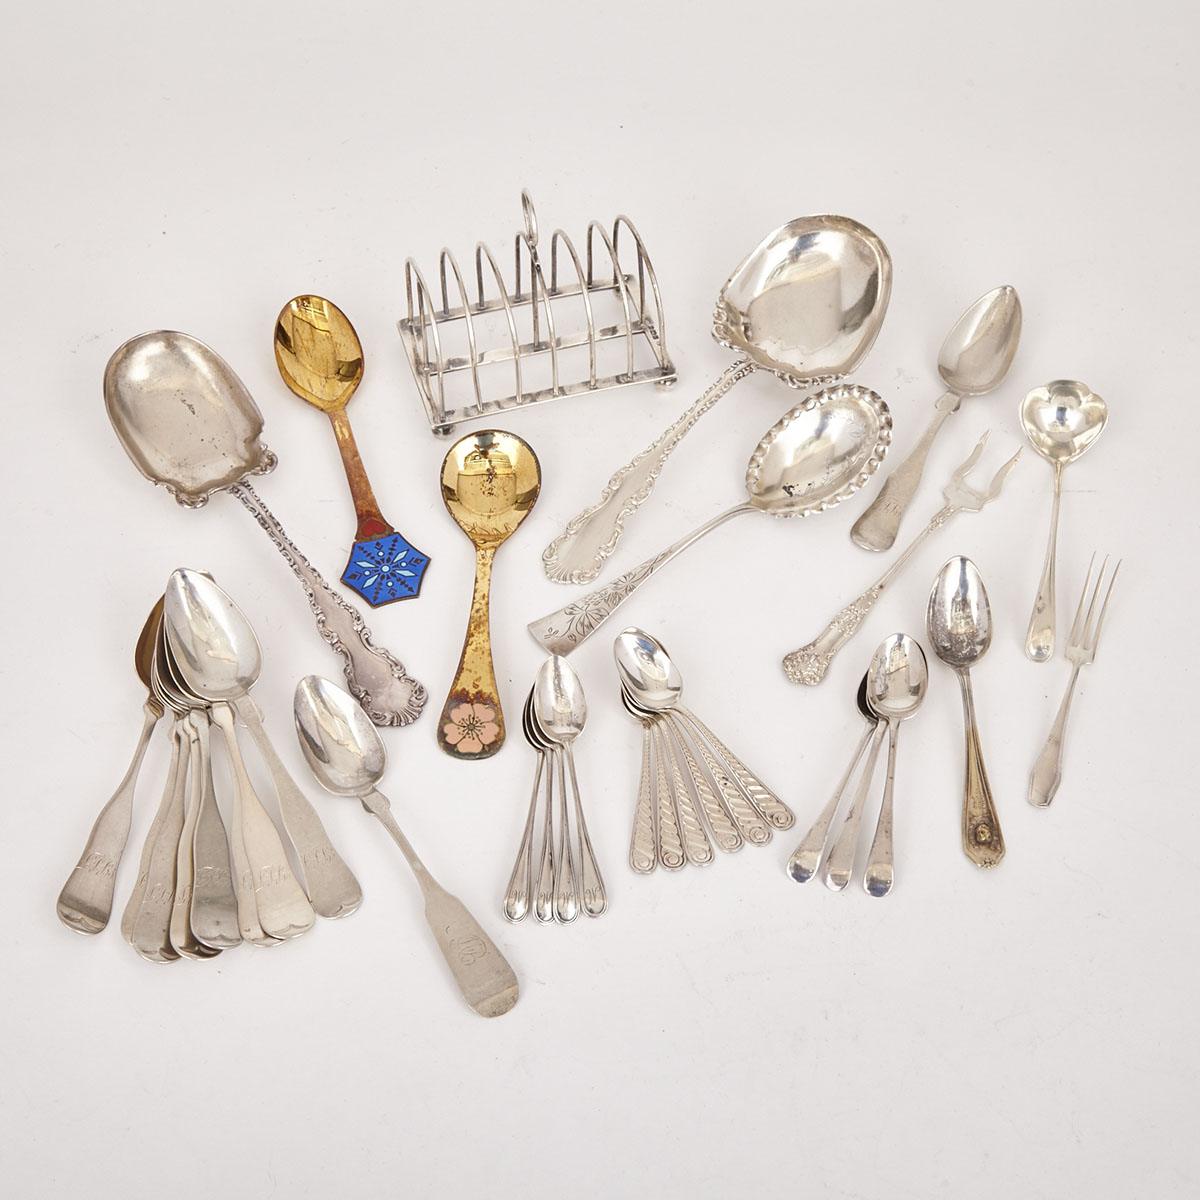 Grouped Lot of English Silver Toast Rack, William Hutton & Sons, Sheffield, 1913 and Mixed English, Danish and North American Silver Flatware, 19th/20th century